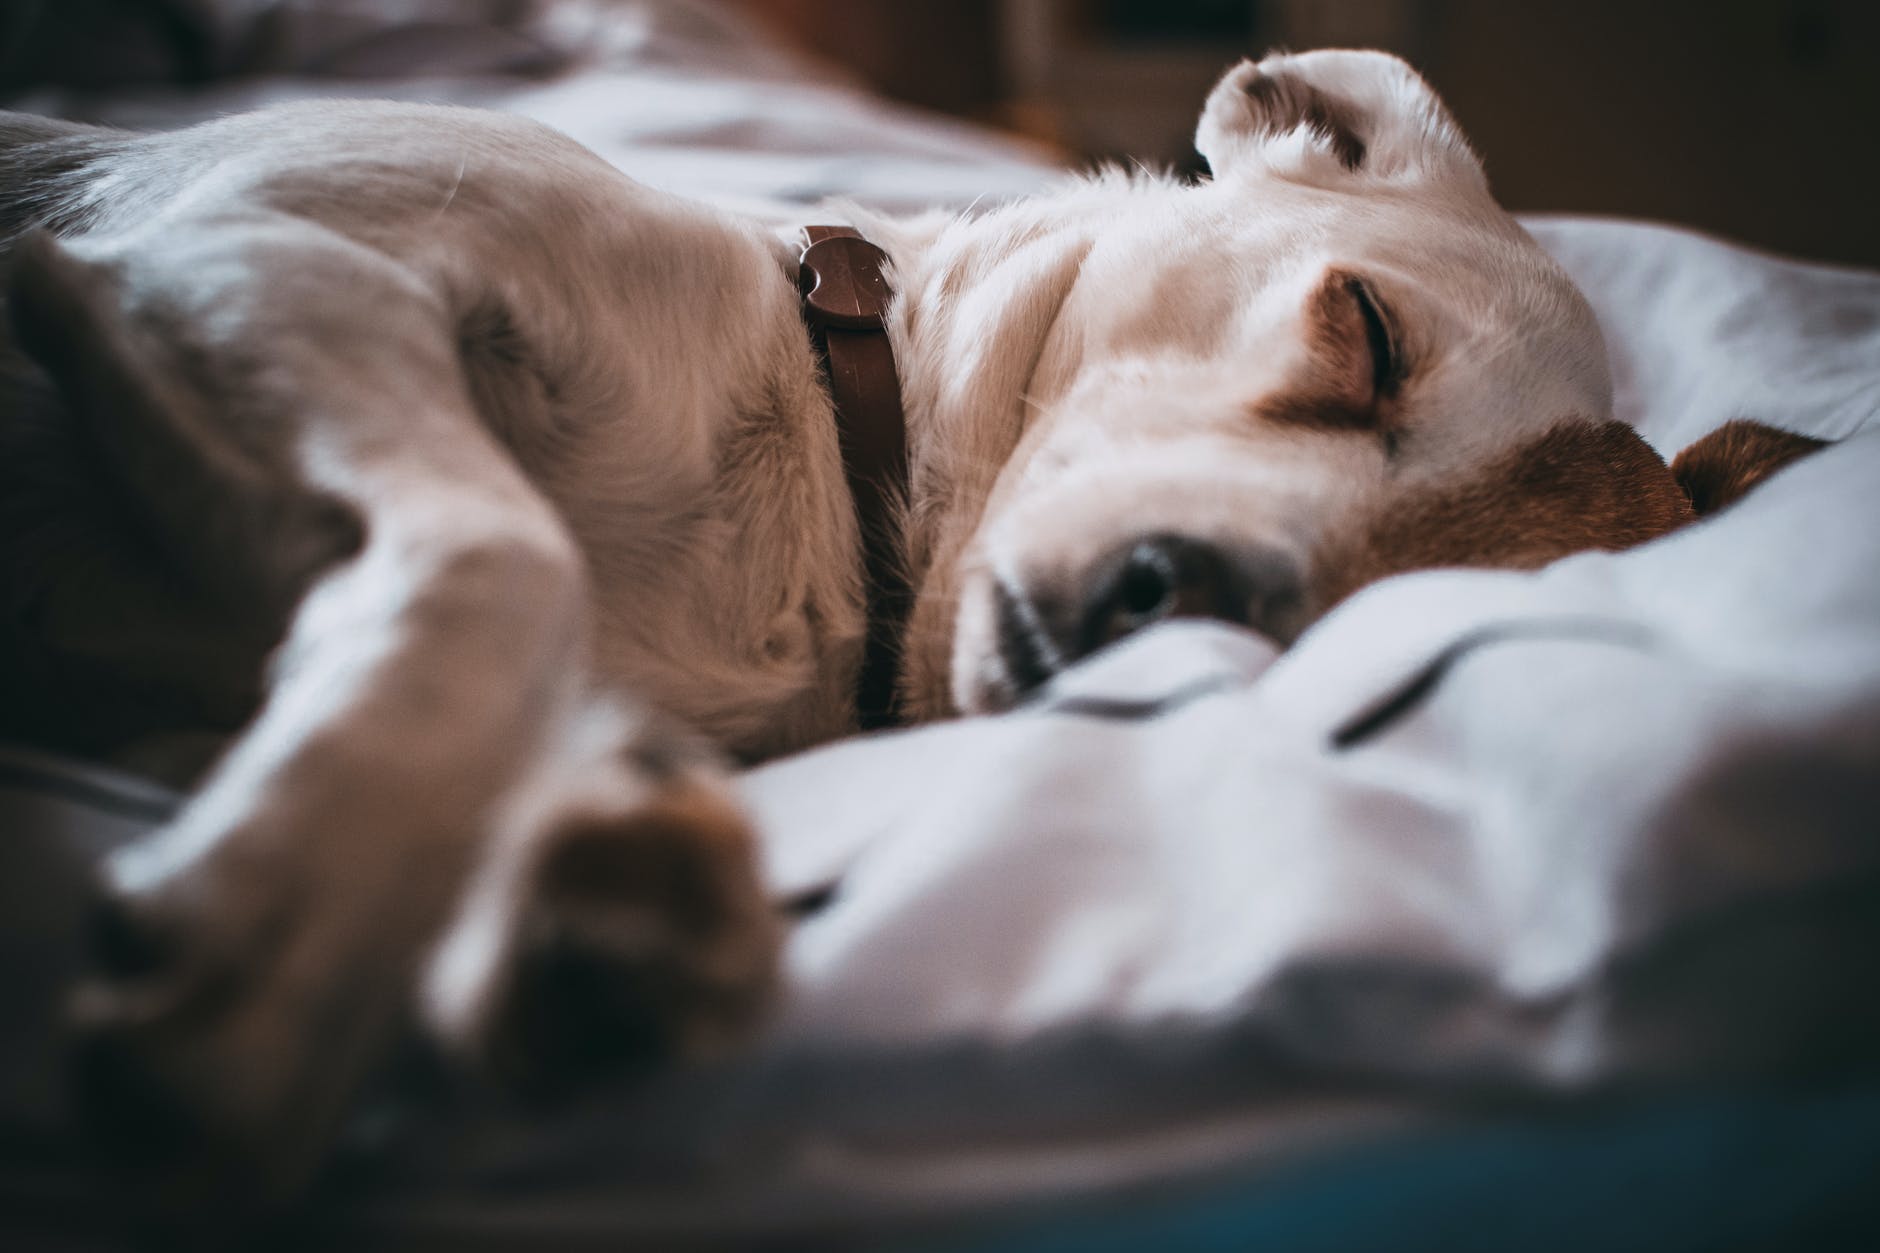 10 Ways to Prepare for The Last Days of Your Dying Dog